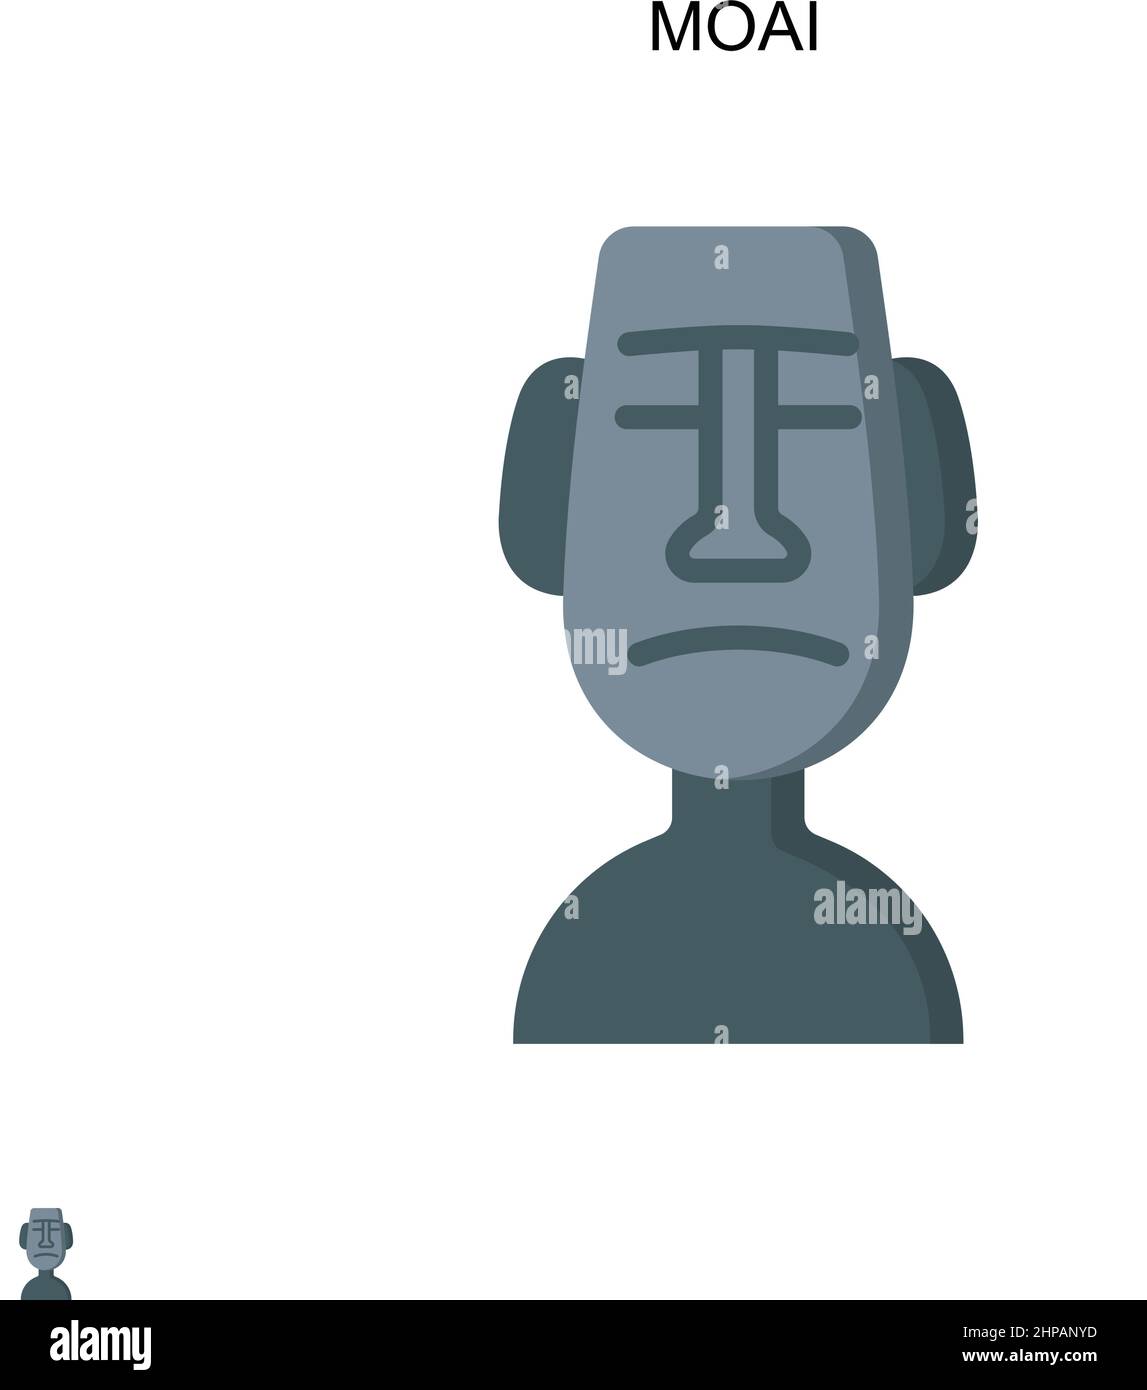 🗿 moai Emoji Images Download: Big Picture in HD, Animation Image and  Vector Graphics